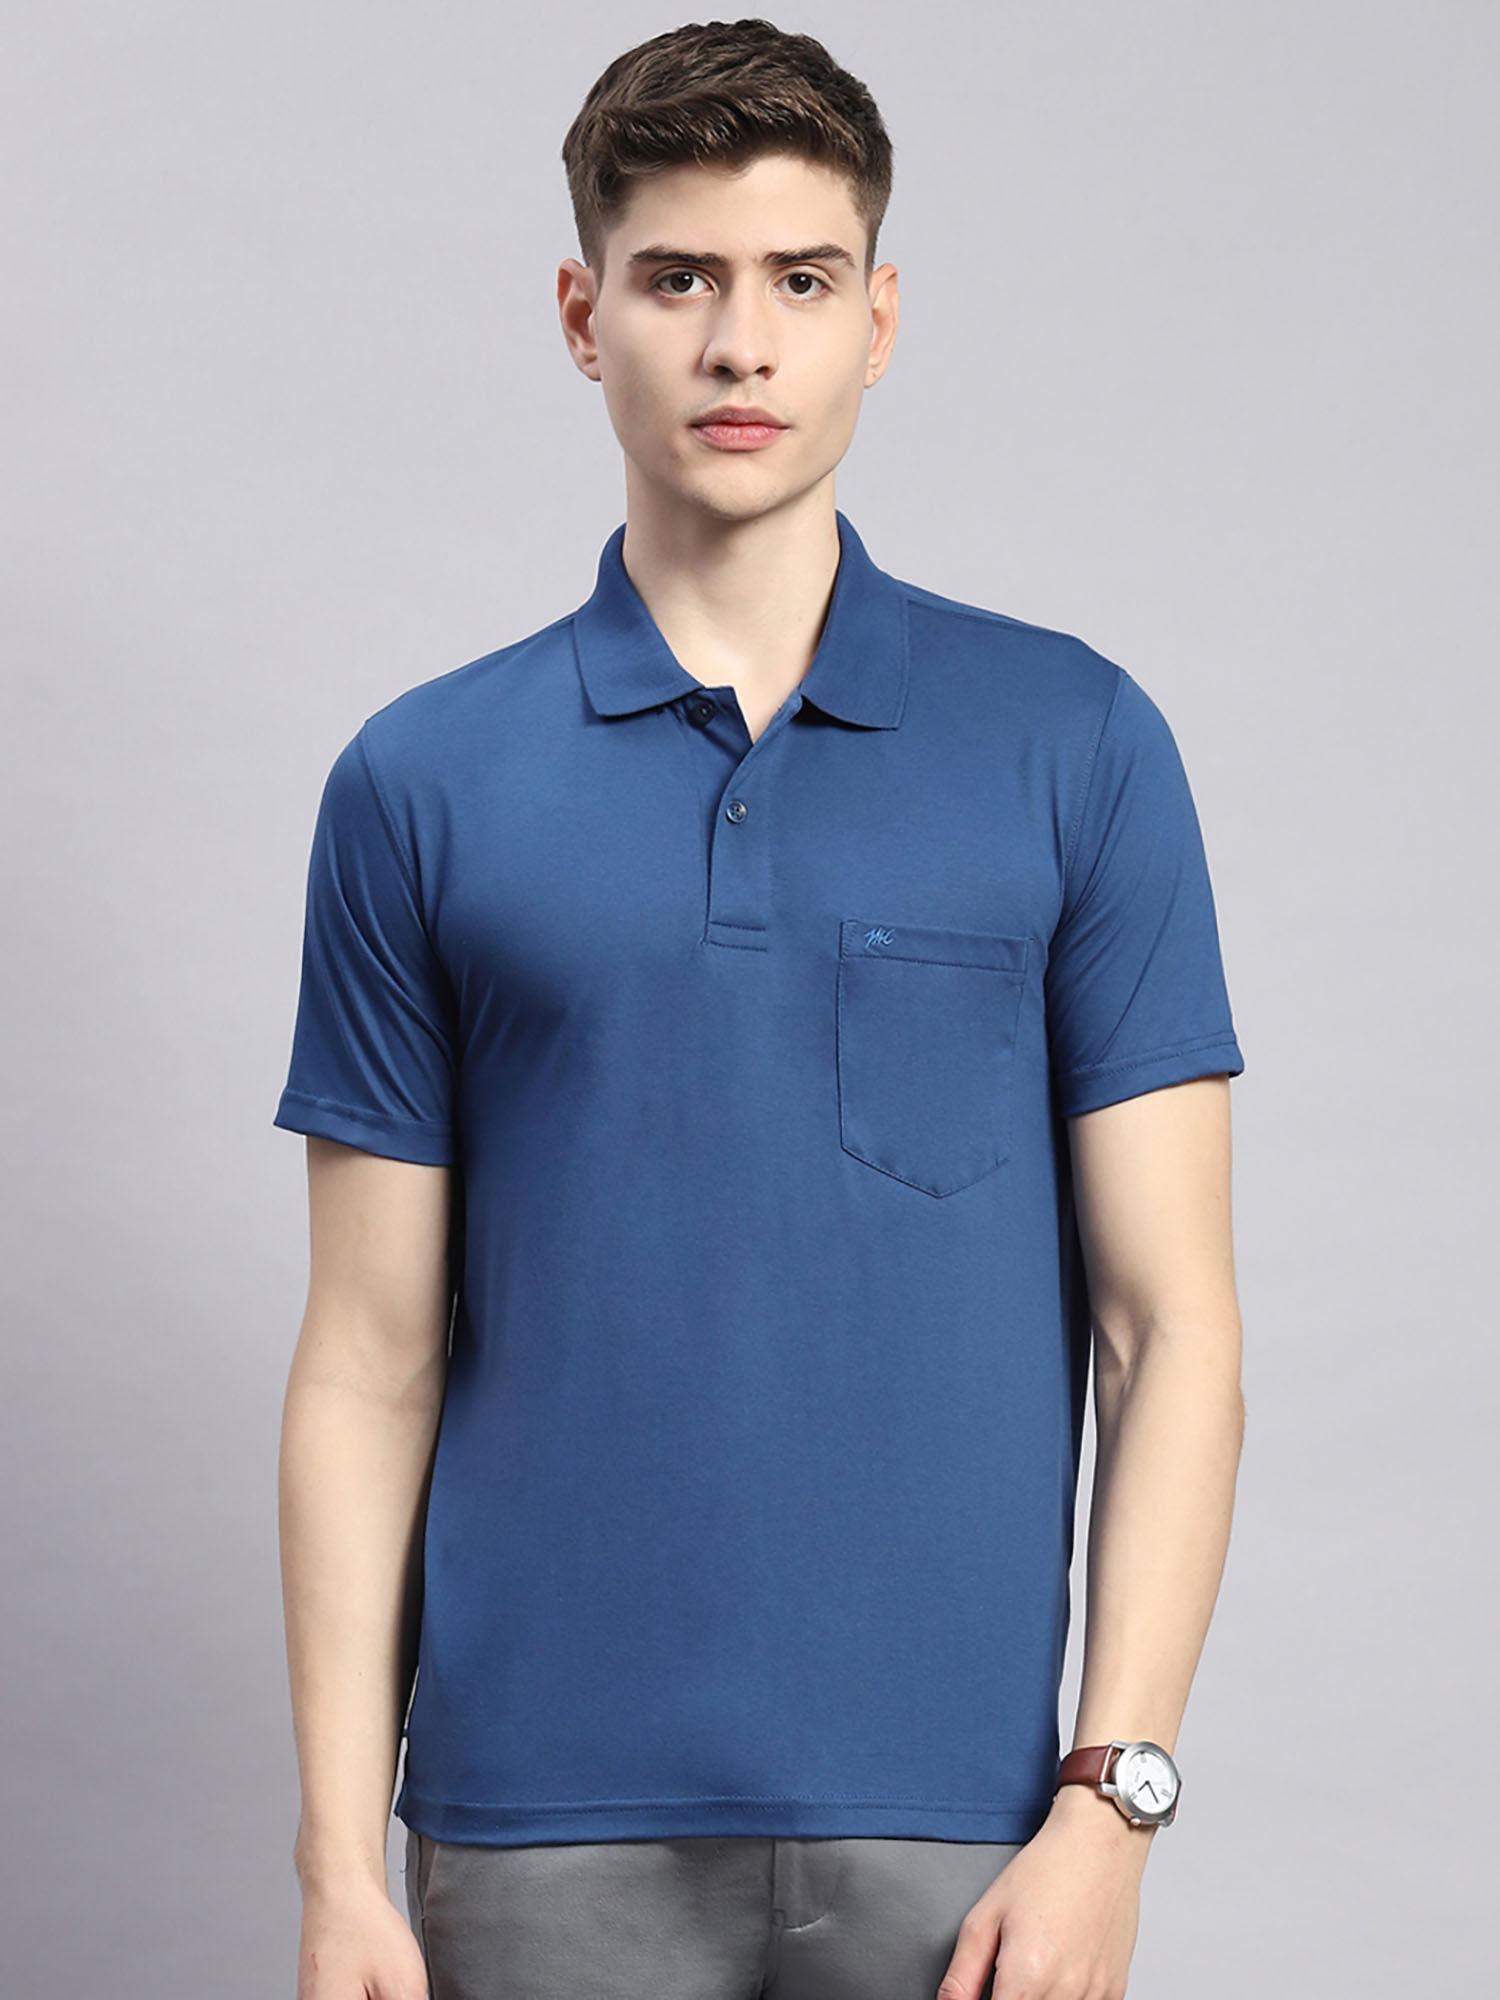 mens-solid-navy-blue-cotton-blend-polo-collar-half-sleeve-casual-t-shirt